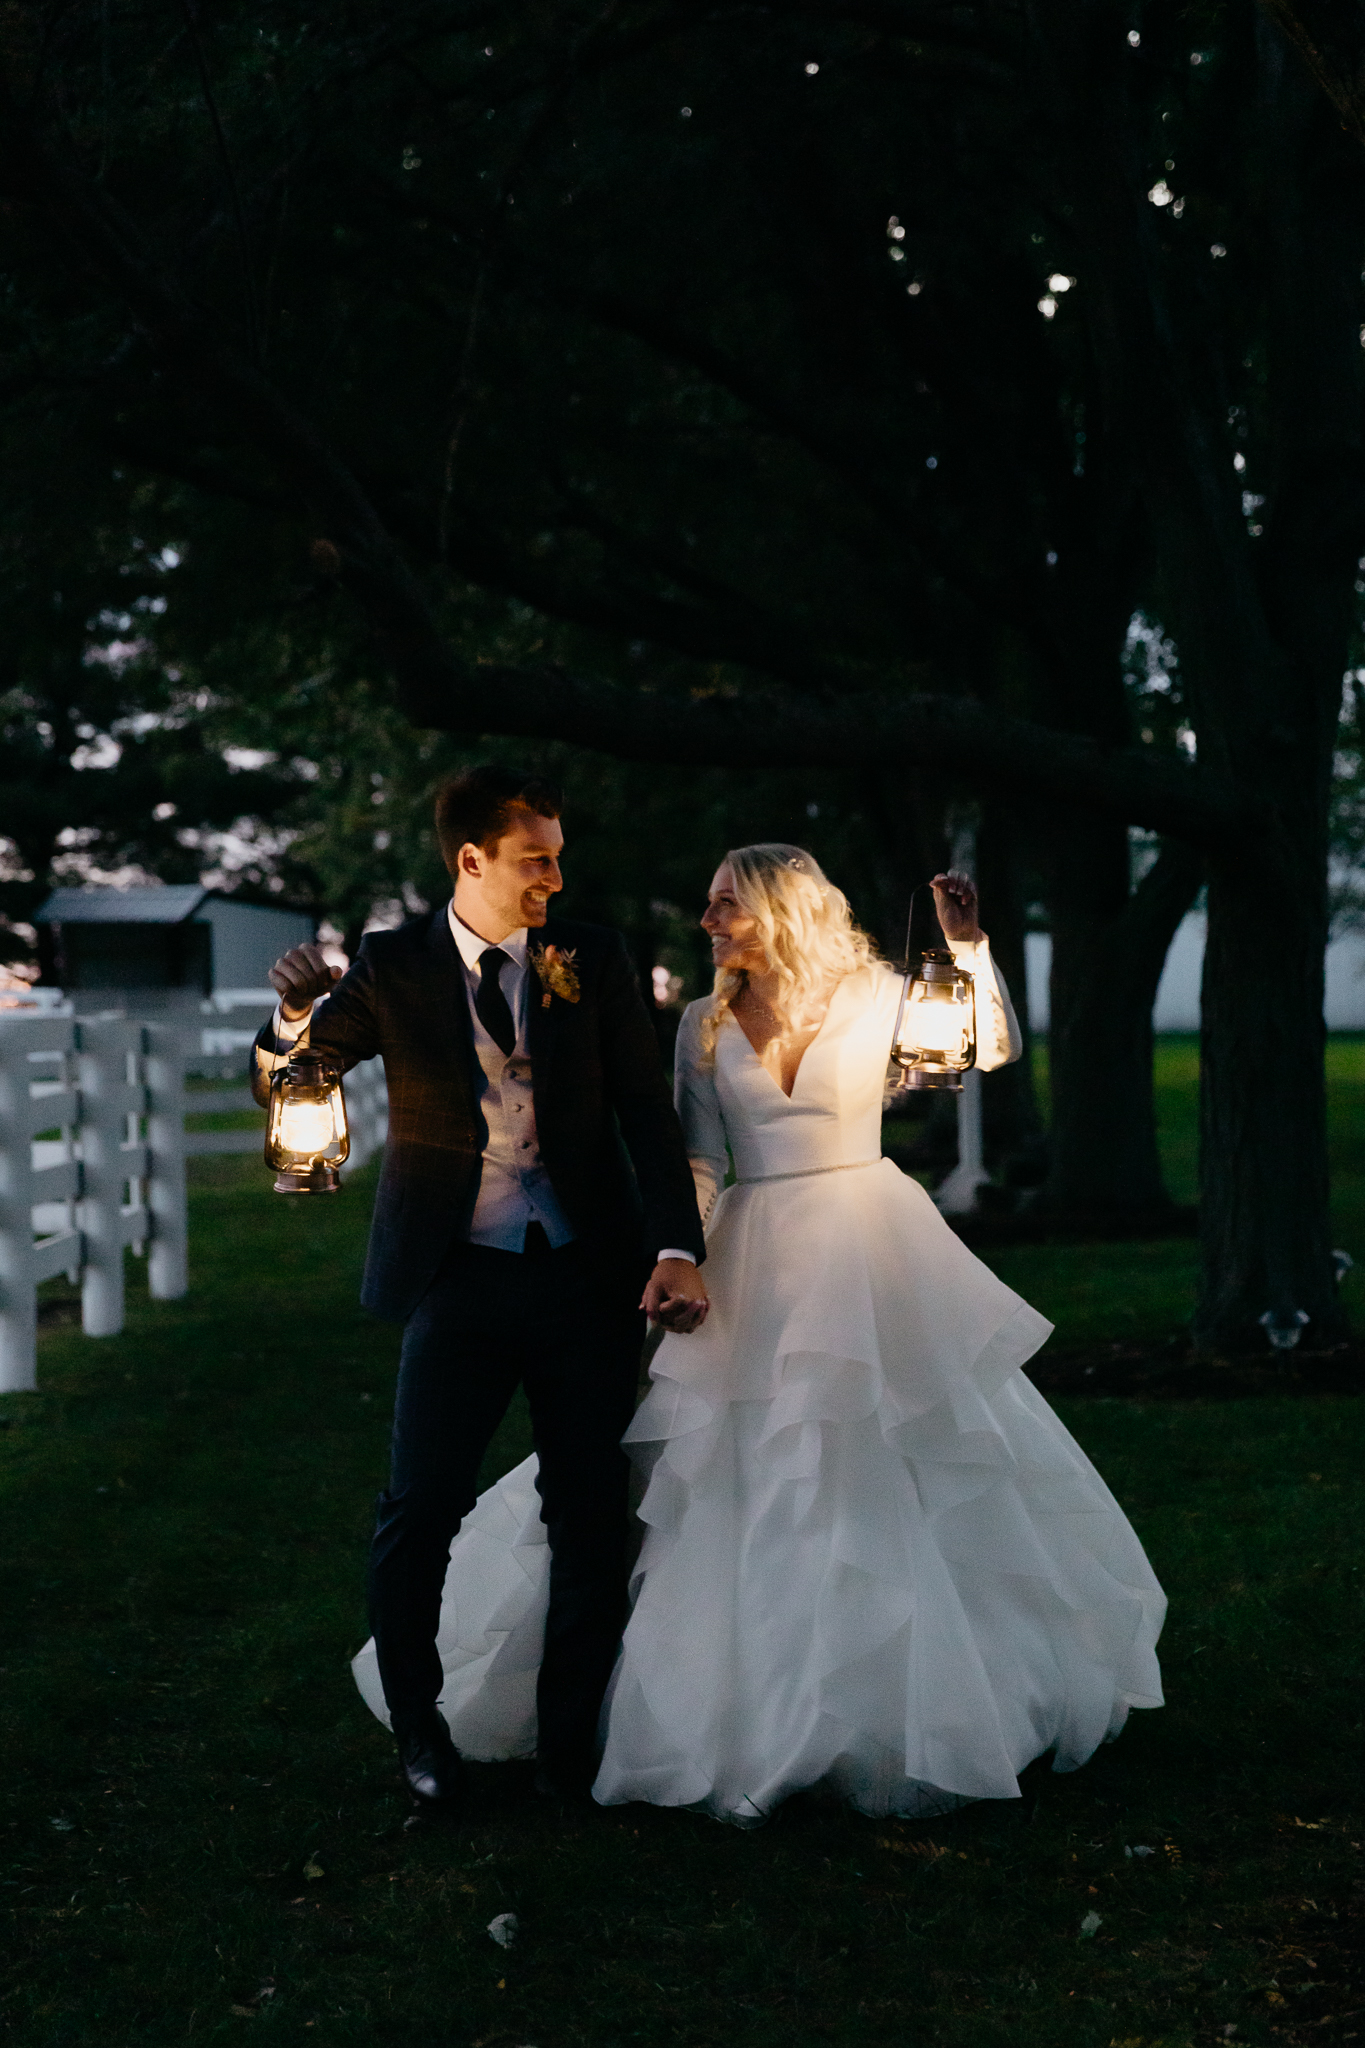 Bride and groom kissing in the dark outdoors, holding lanterns next to each other